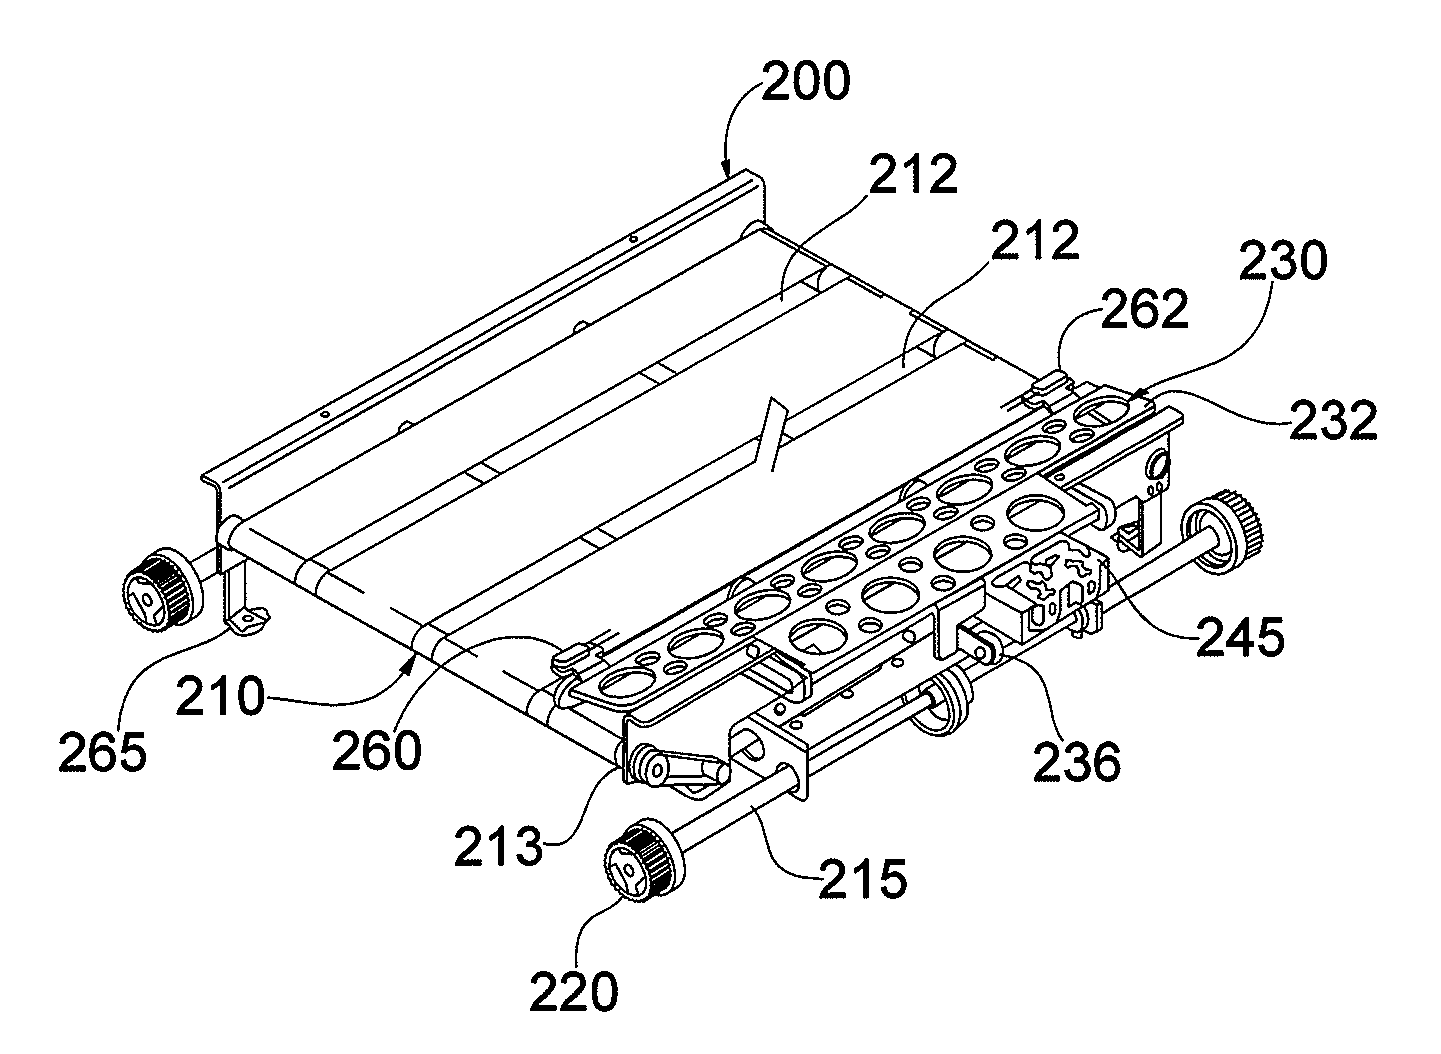 Method and apparatus for sorting items